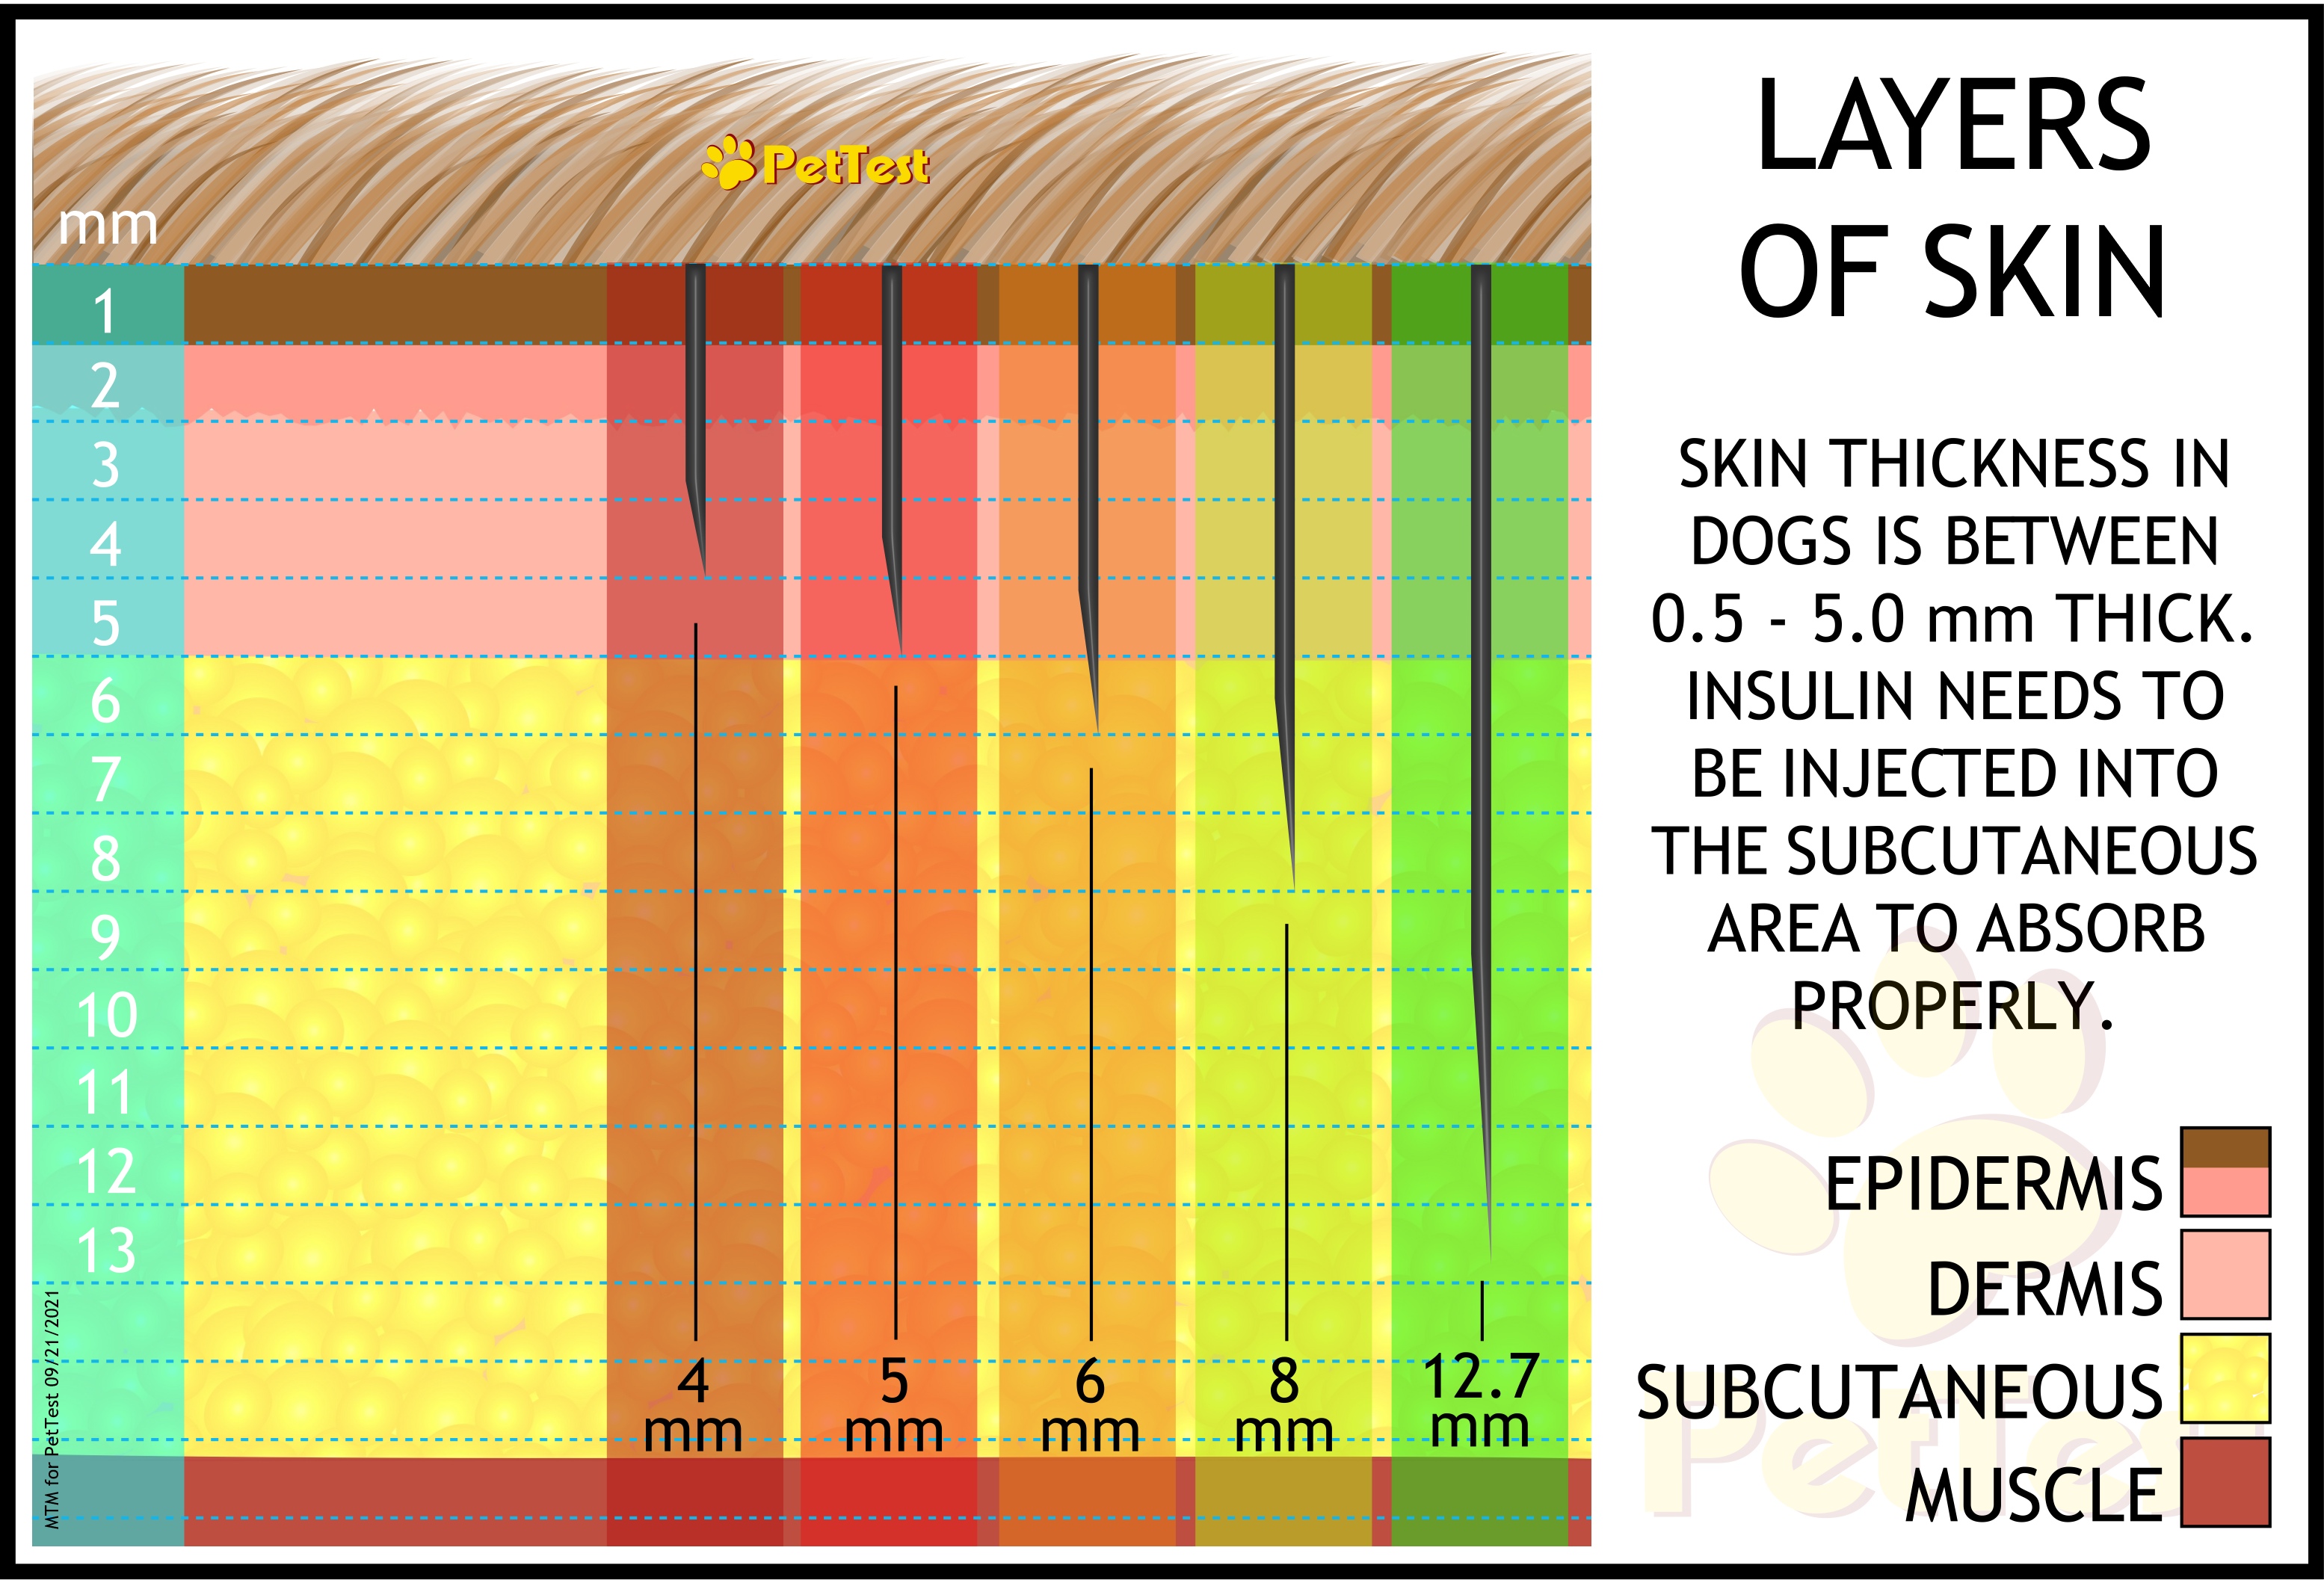 Layers of Skin and Needle Length for PT mtm